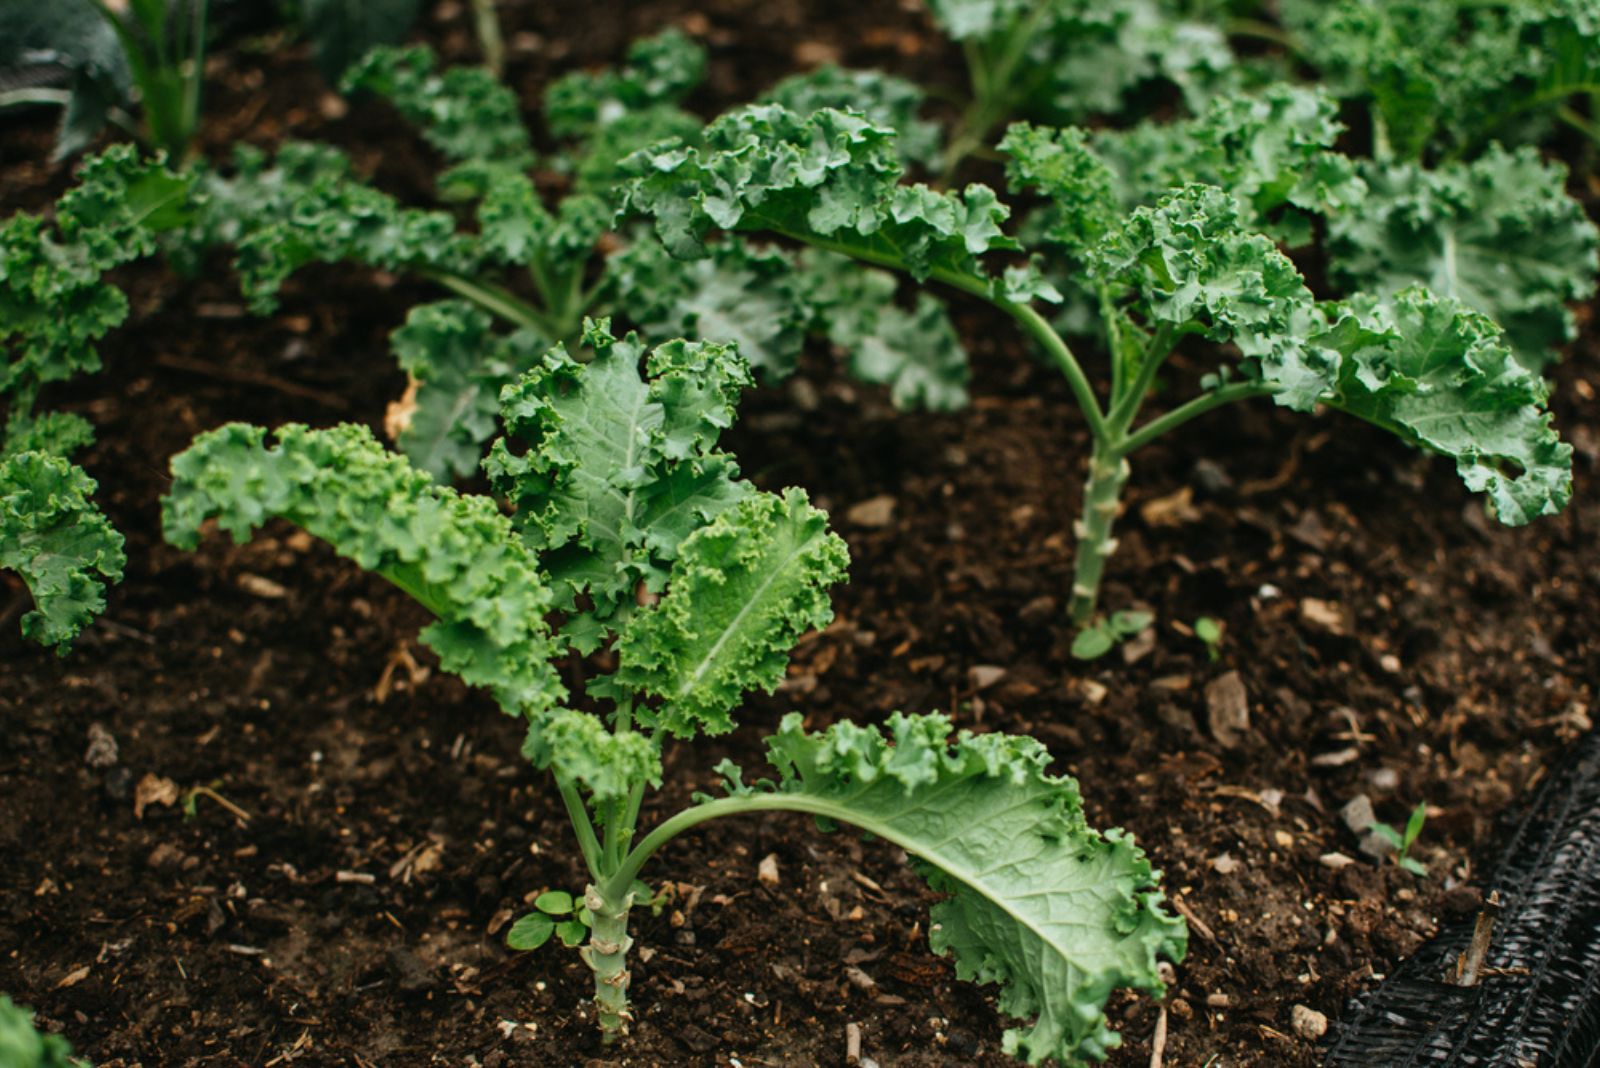 Kale planted in the garden